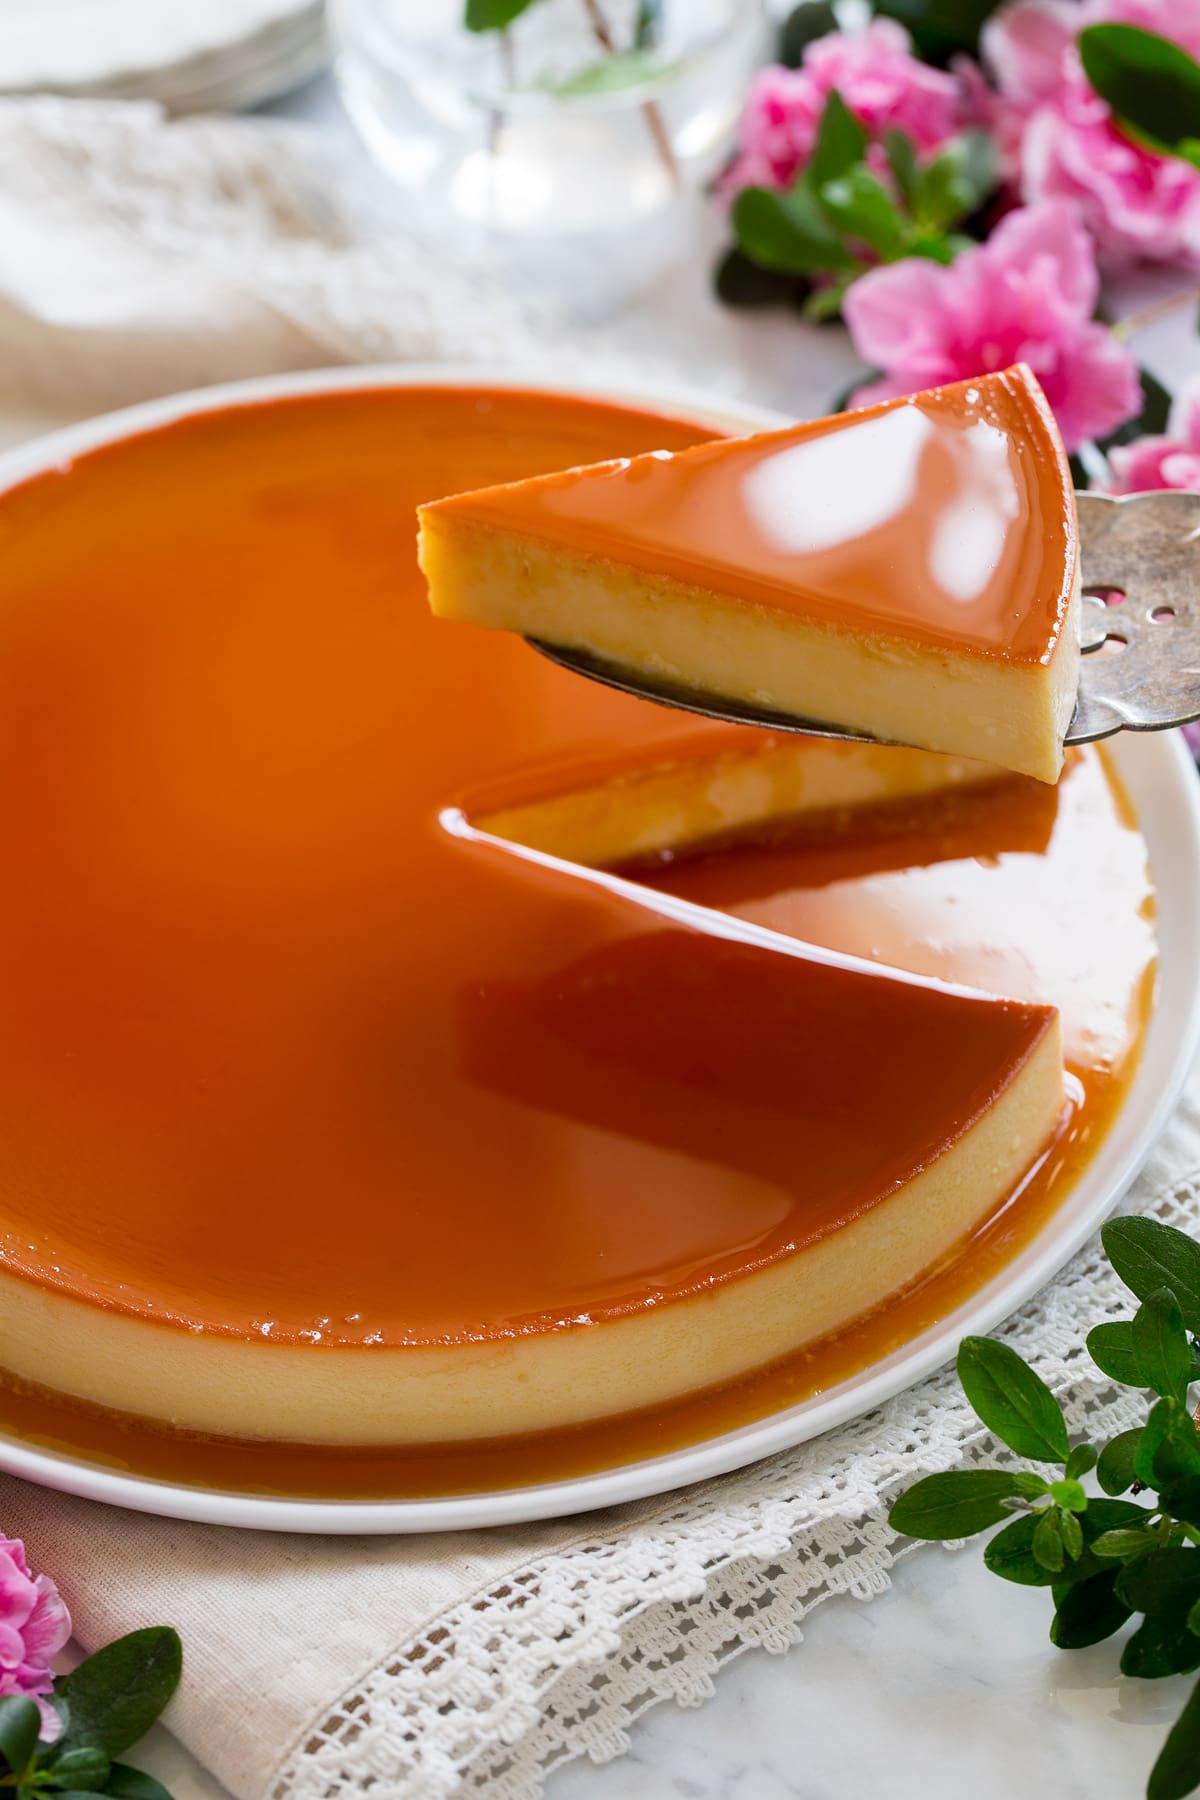 Image showing server spatula removing slice from whole flan.